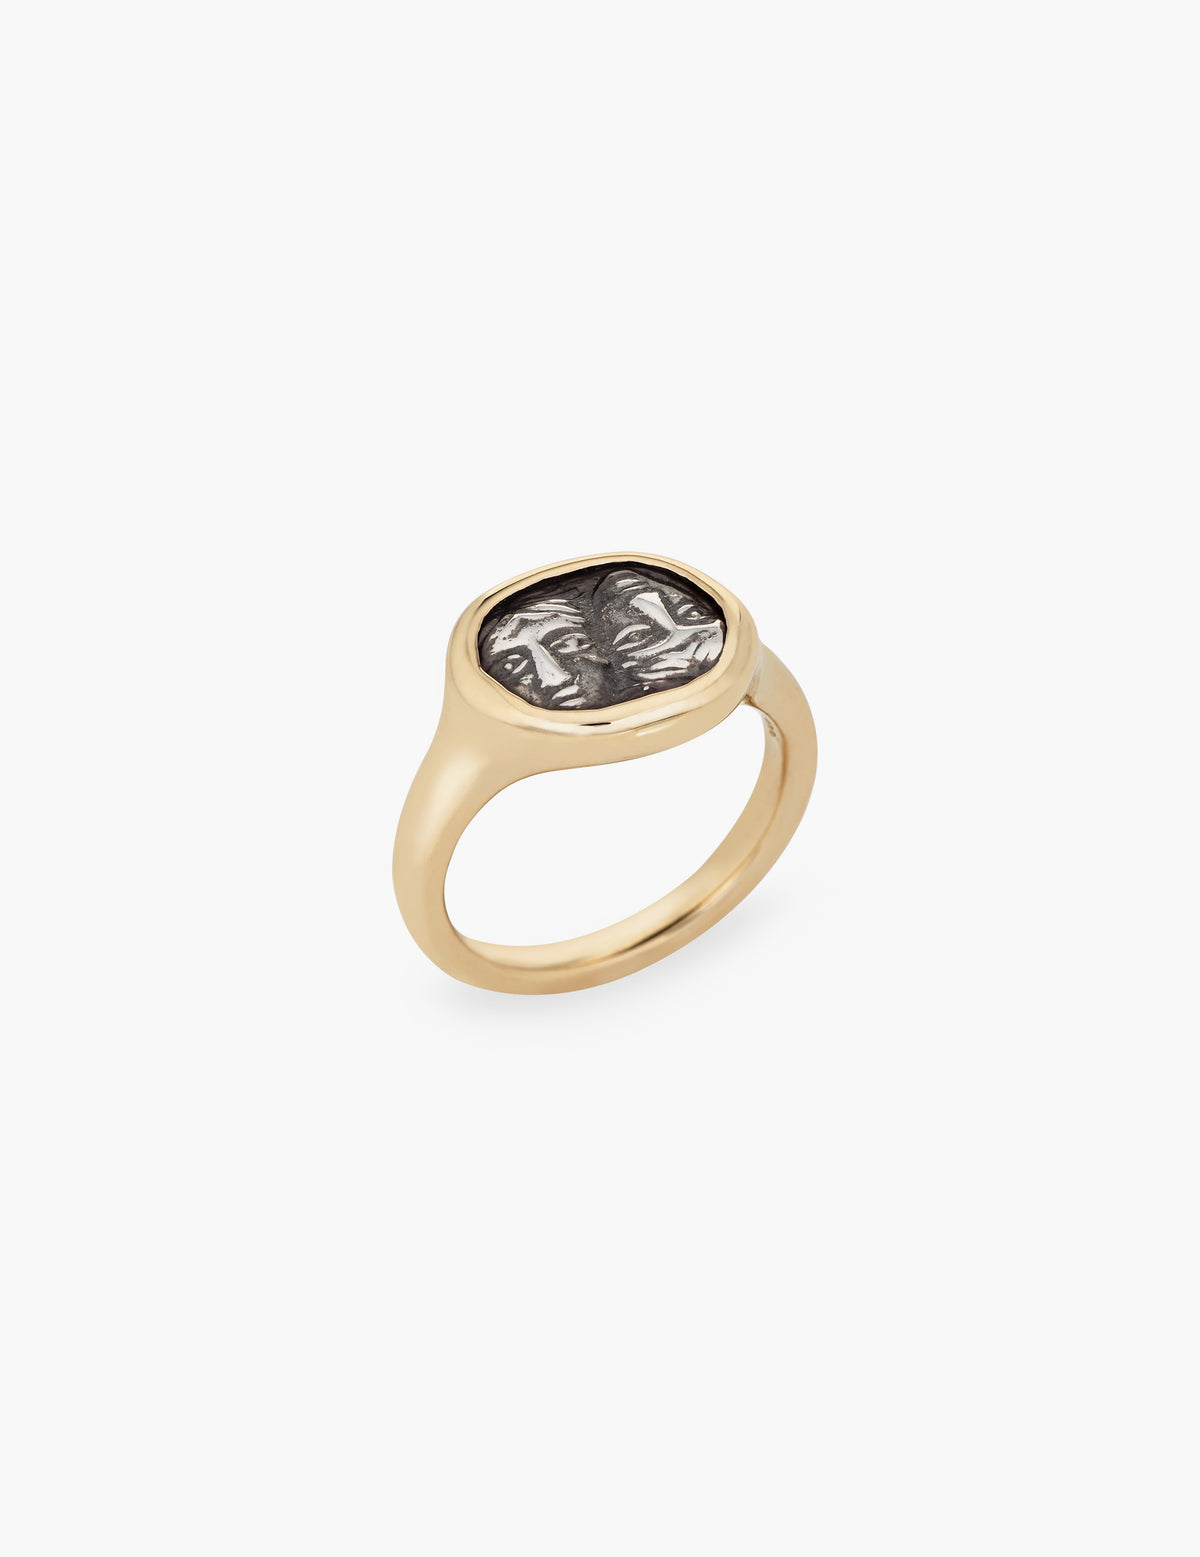 Gemini Coin Ring in Gold and Sterling Silver